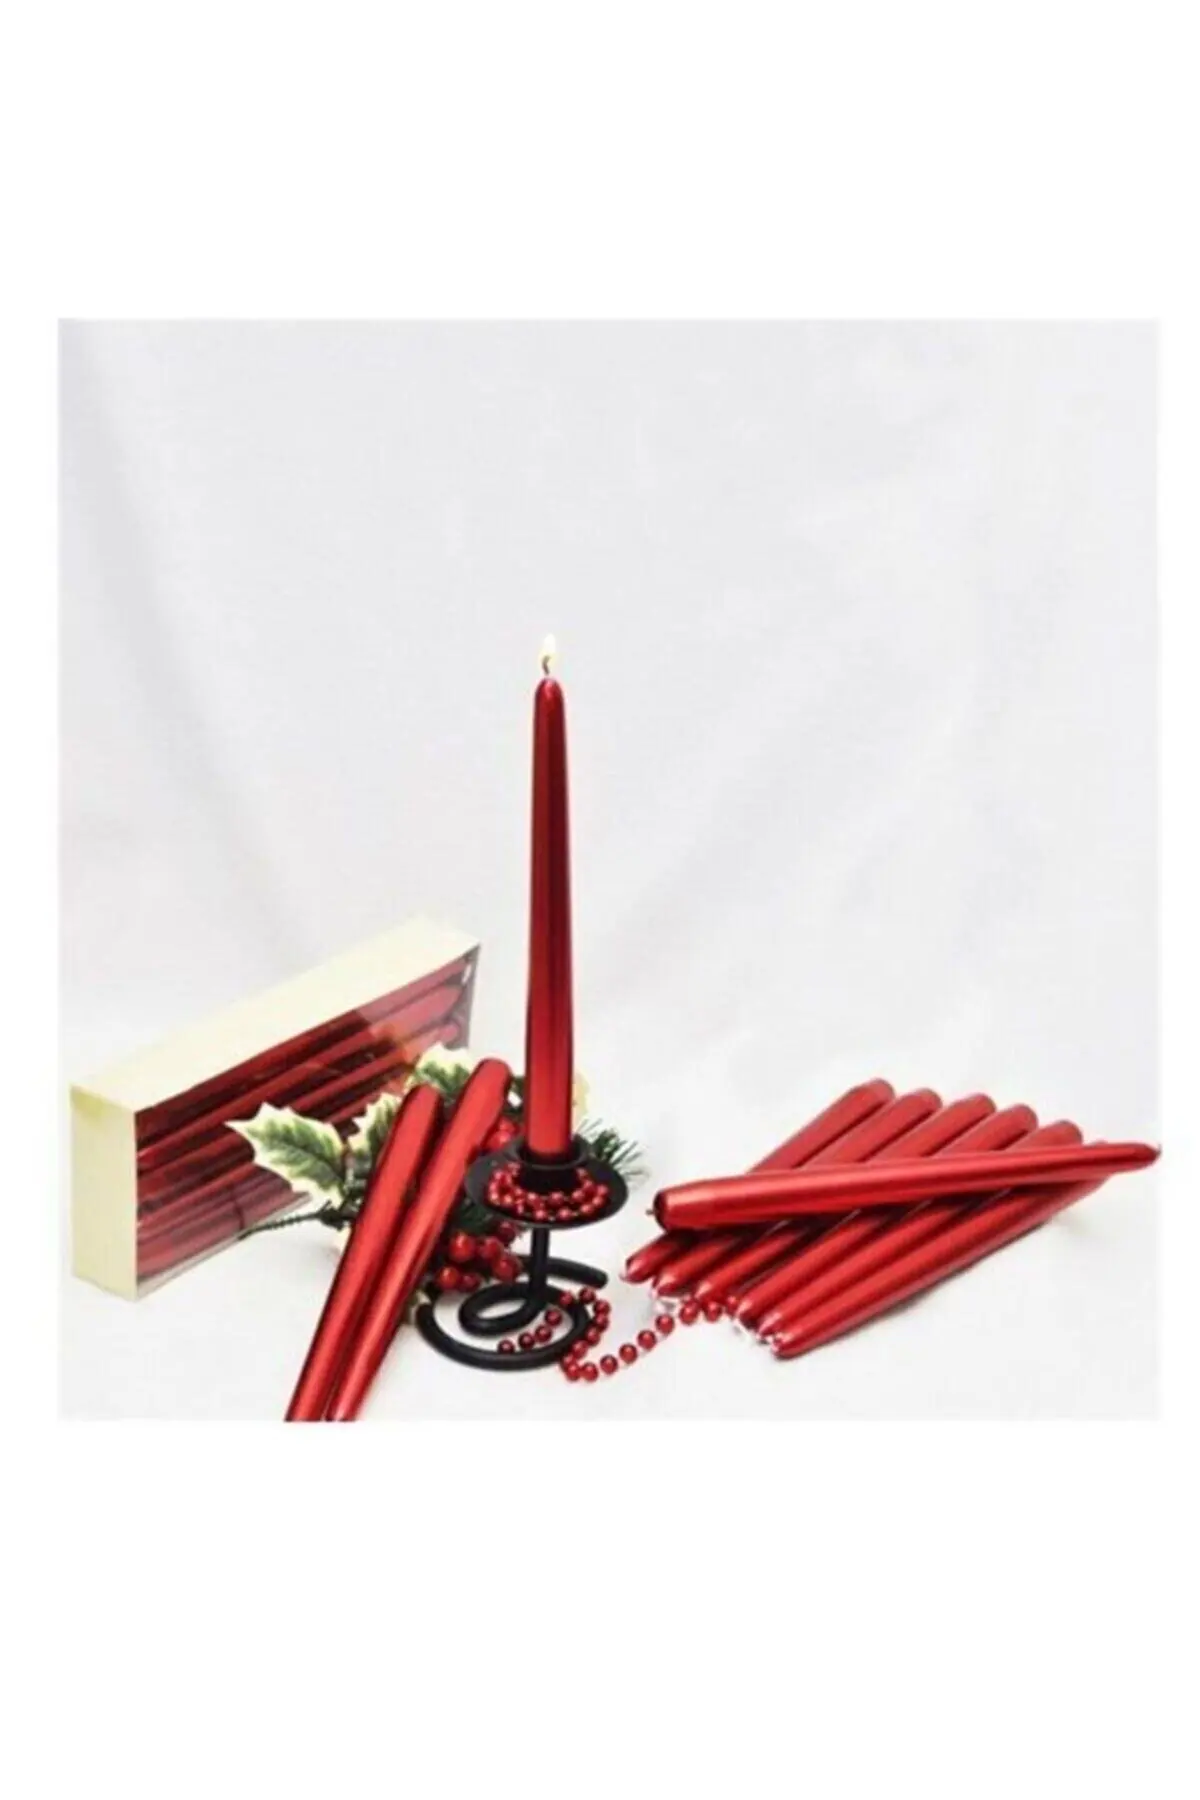 

Red Taper Candlestick Candle 2li Bridal Jewelry For Wedding Gift Candles Henna Night